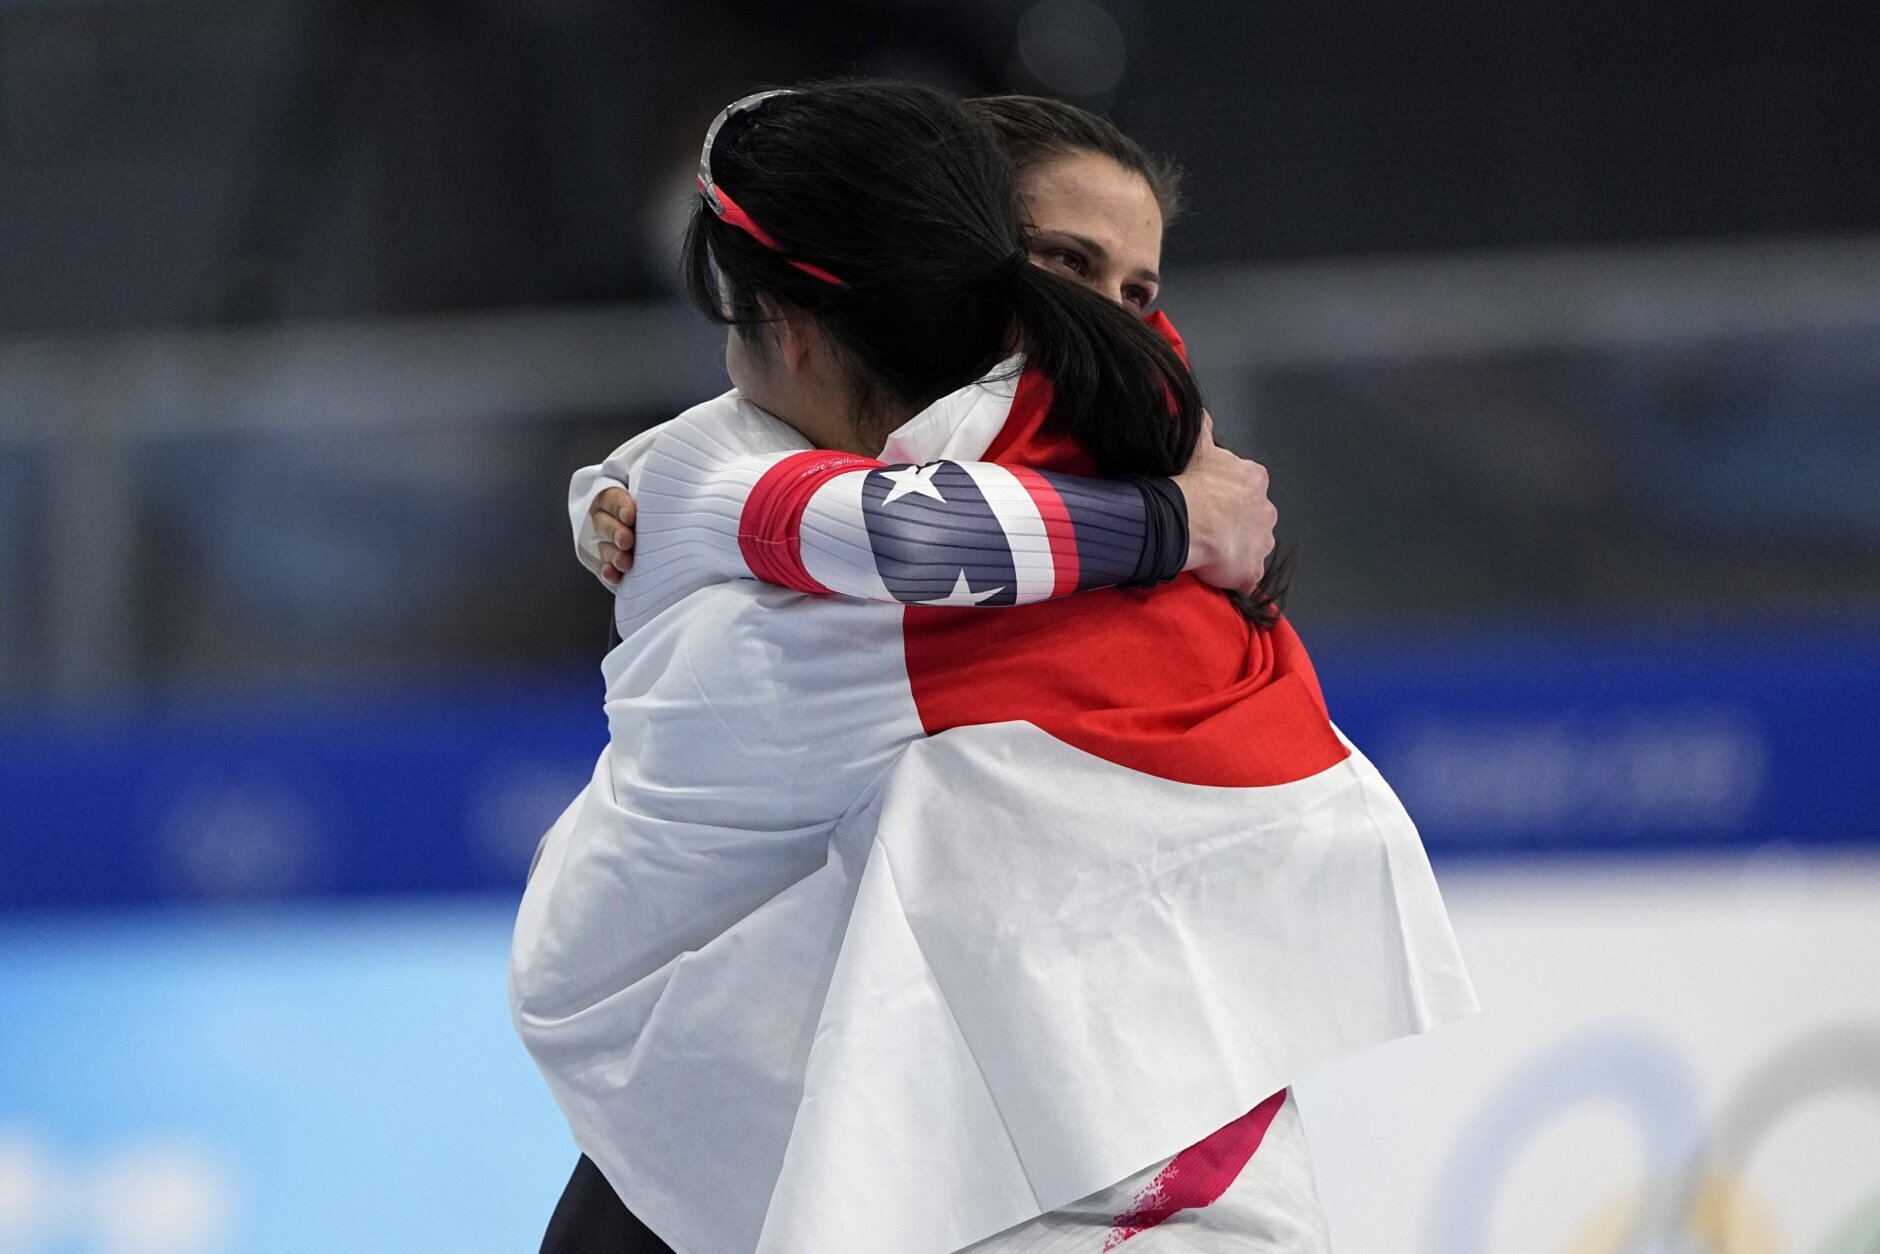 <p>Gold medal winner Miho Takagi of Japan hugs bronze medalist Brittany Bowe of the United States, facing right, after the women&#8217;s speedskating 1,000-meter finals at the 2022 Winter Olympics, Thursday, Feb. 17, 2022, in Beijing.</p>
